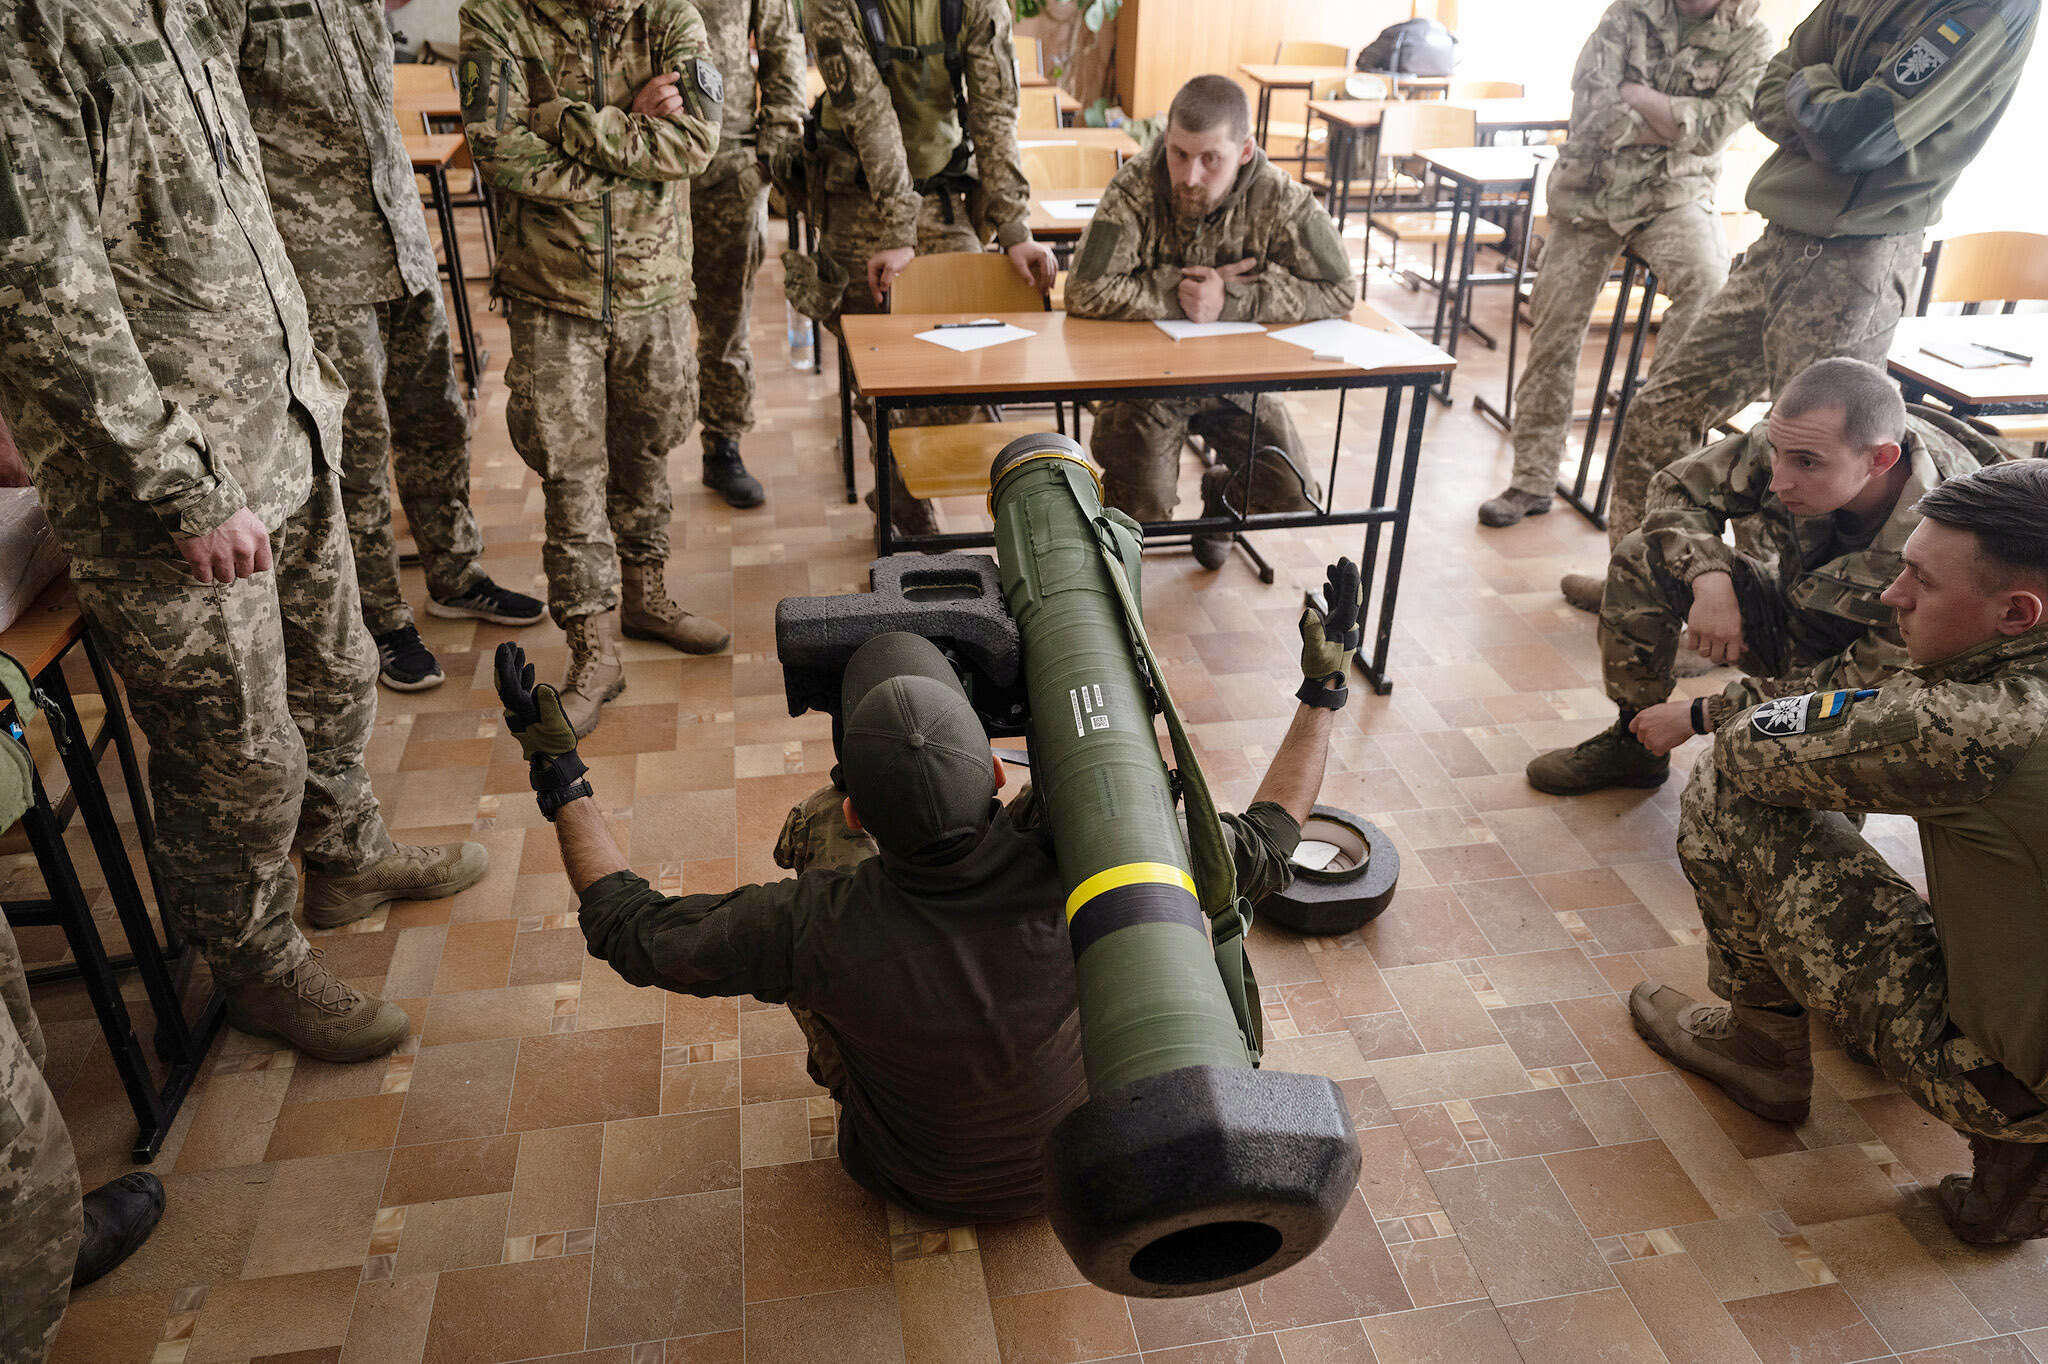 An American volunteer teaching Ukrainian soldiers how to use a Javelin missile outside Zaporizhzhia, in southeastern Ukraine, on April 28.  Courtesy of Lynsey Addario for The New York Times